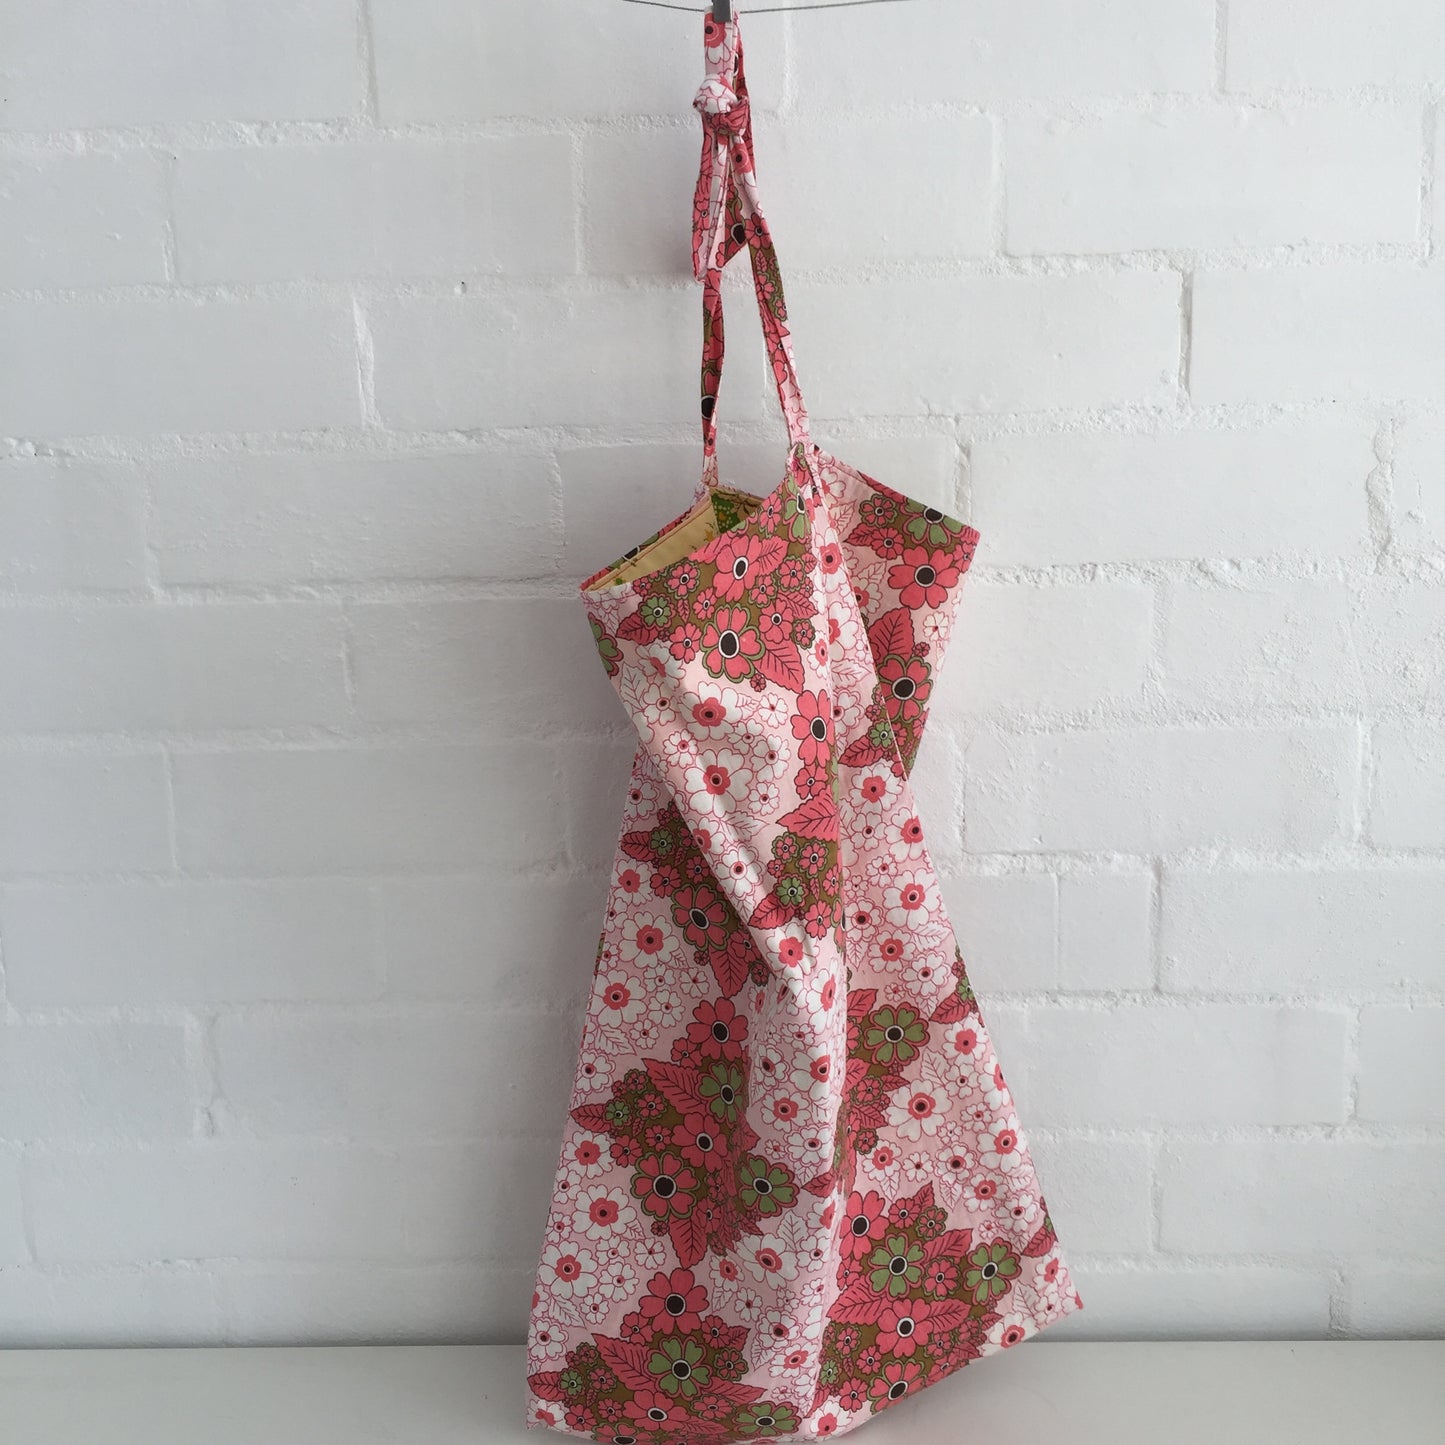 Vintage FABRIC Double Sided TOTE Handmade BAG Floral ADORABLE Shopping Market